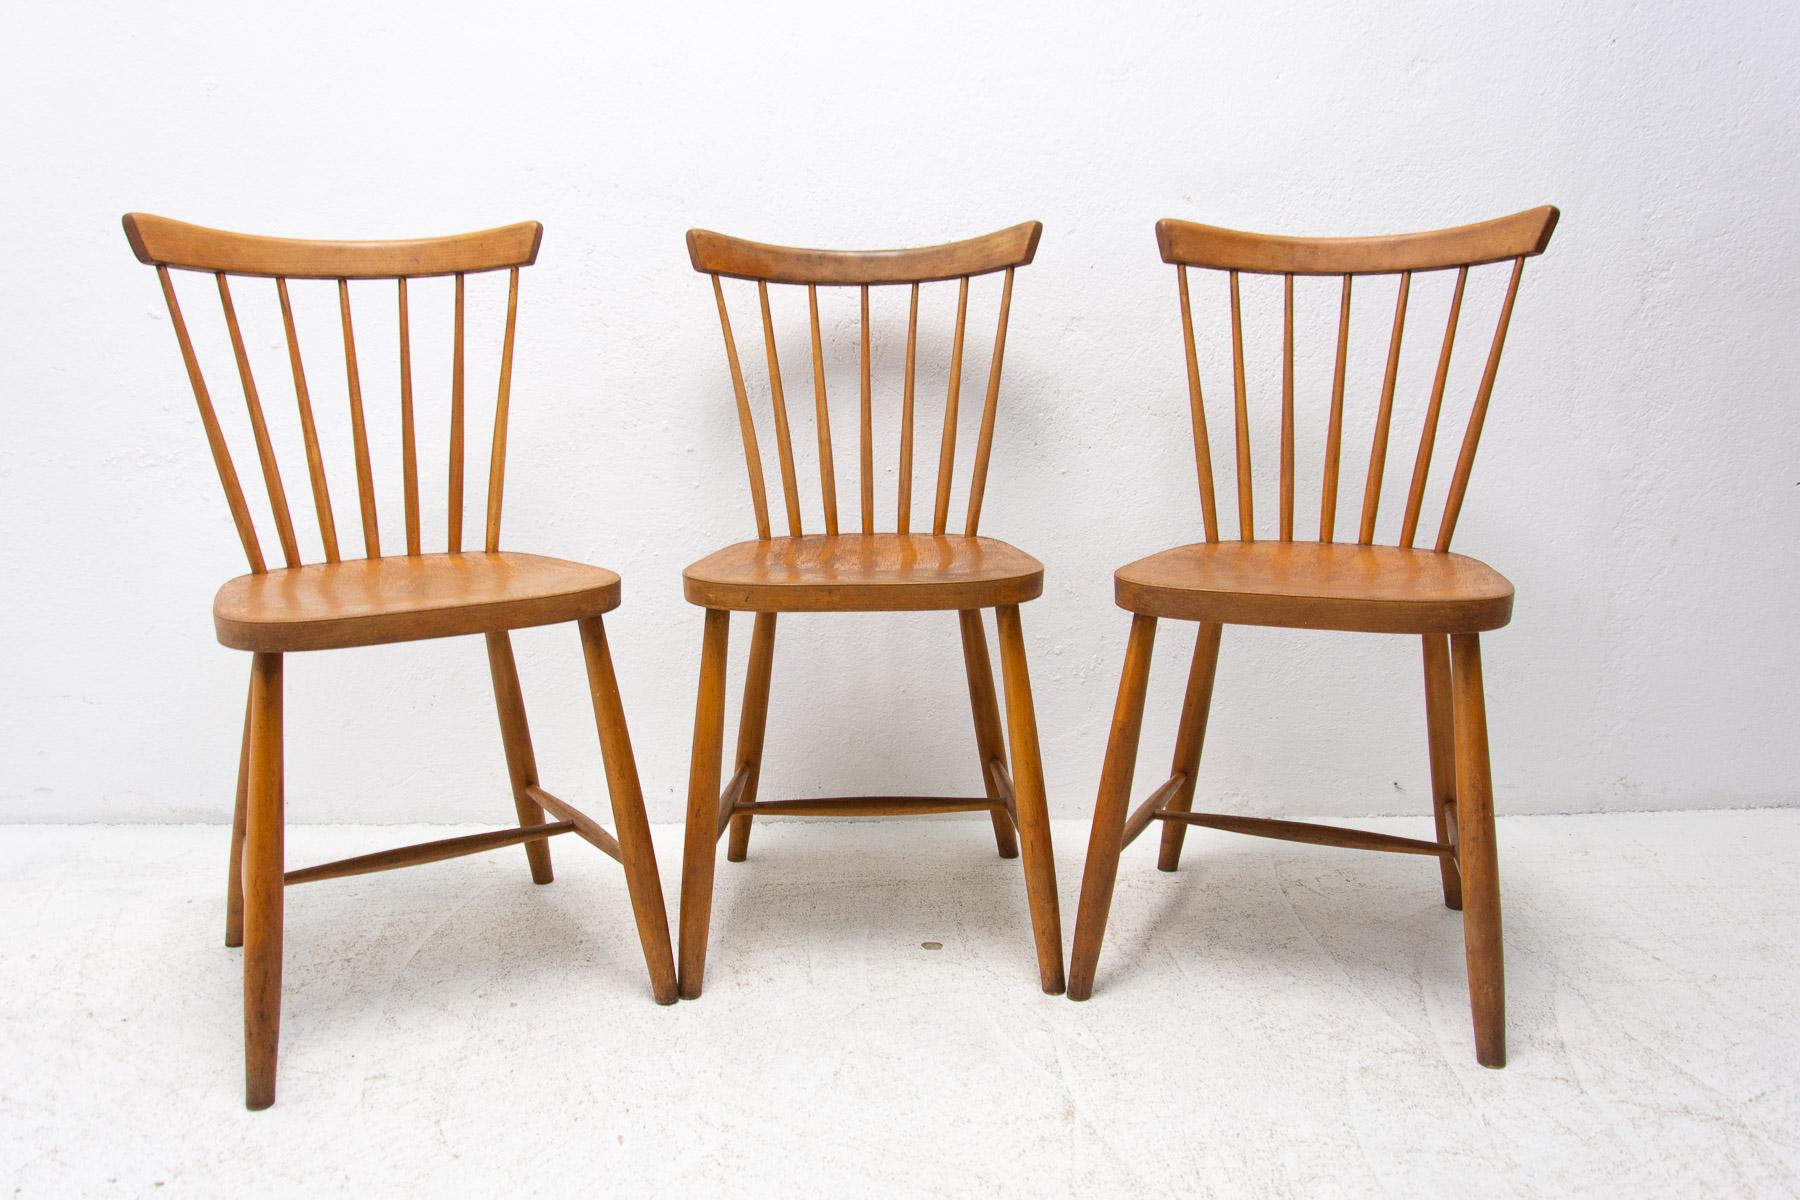 Czechoslovak dining chairs, 1960´s, designed by Antonin Šuman and produced by Tatra nabytok Pravenec. Very interesting shaping. In good Vintage condition, showing signs of age and using. Price is for the set of 3.

Dimensions:

Height: 82